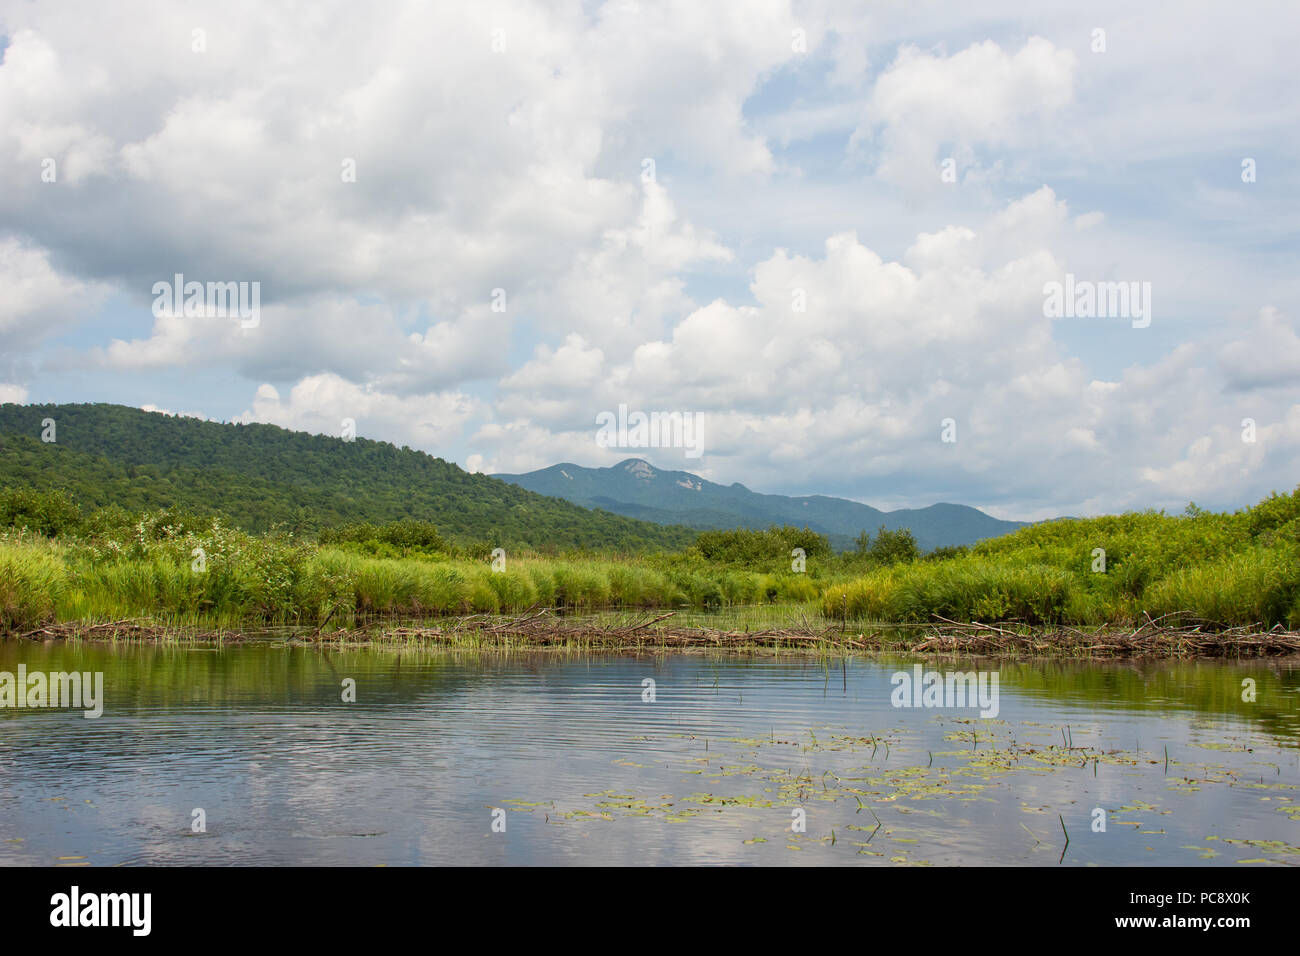 A beaver dam on the Miami River in the Adirondack Mountains with a view of Snowy Mountain in the distance. Stock Photo